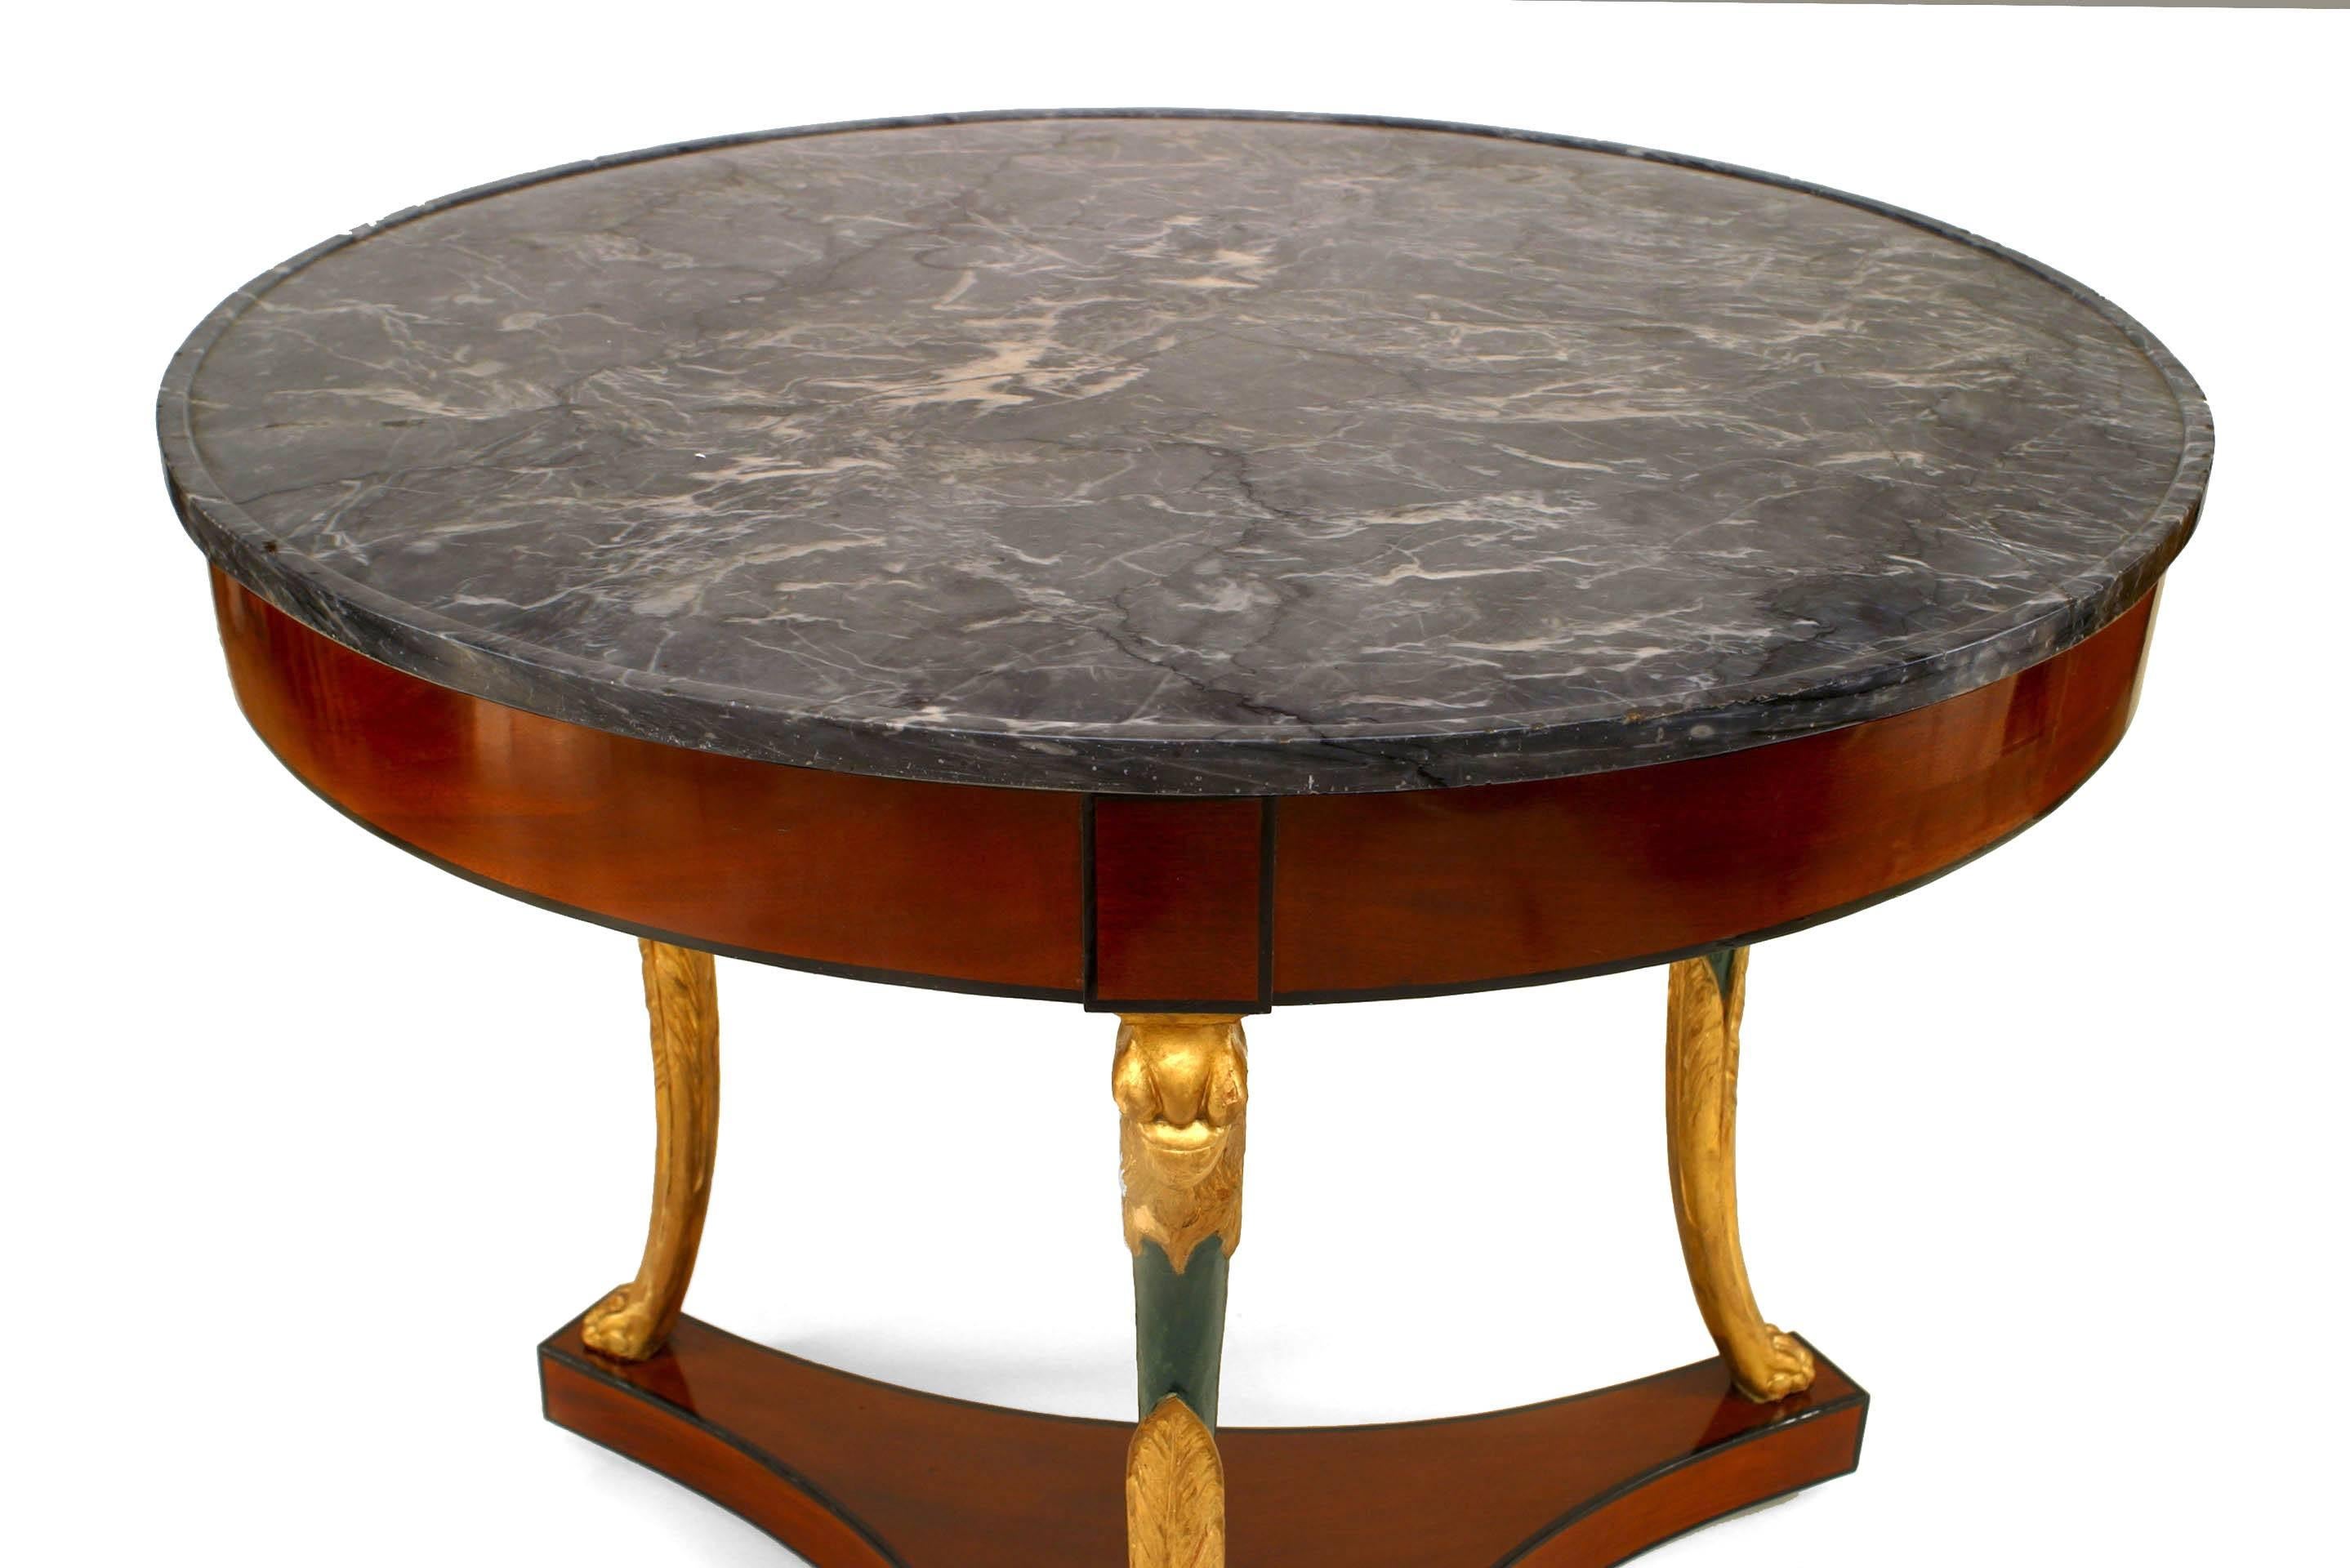 French Empire style (Circa 1825) mahogany and gilt round 3 legged center table on platform base with green lacquered bird heads and grey marble top.
